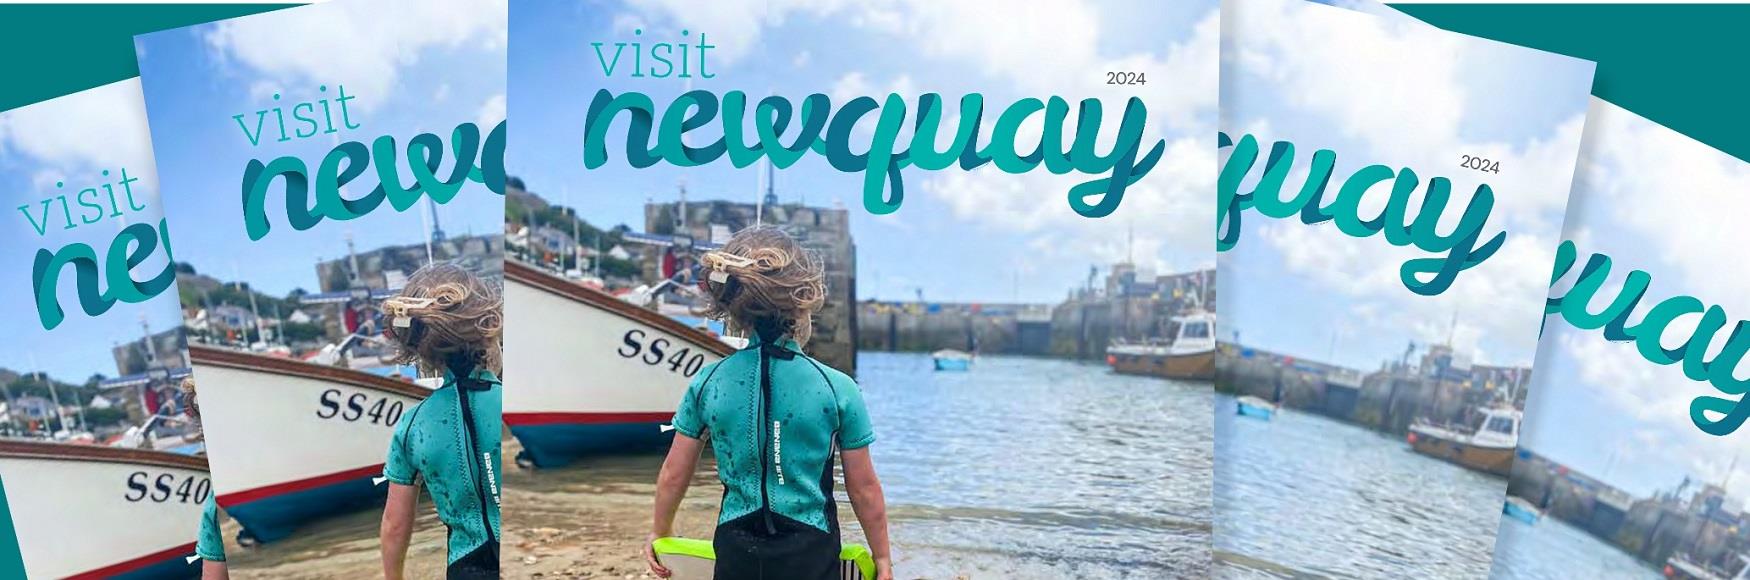 Visit Newquay Guide 2024